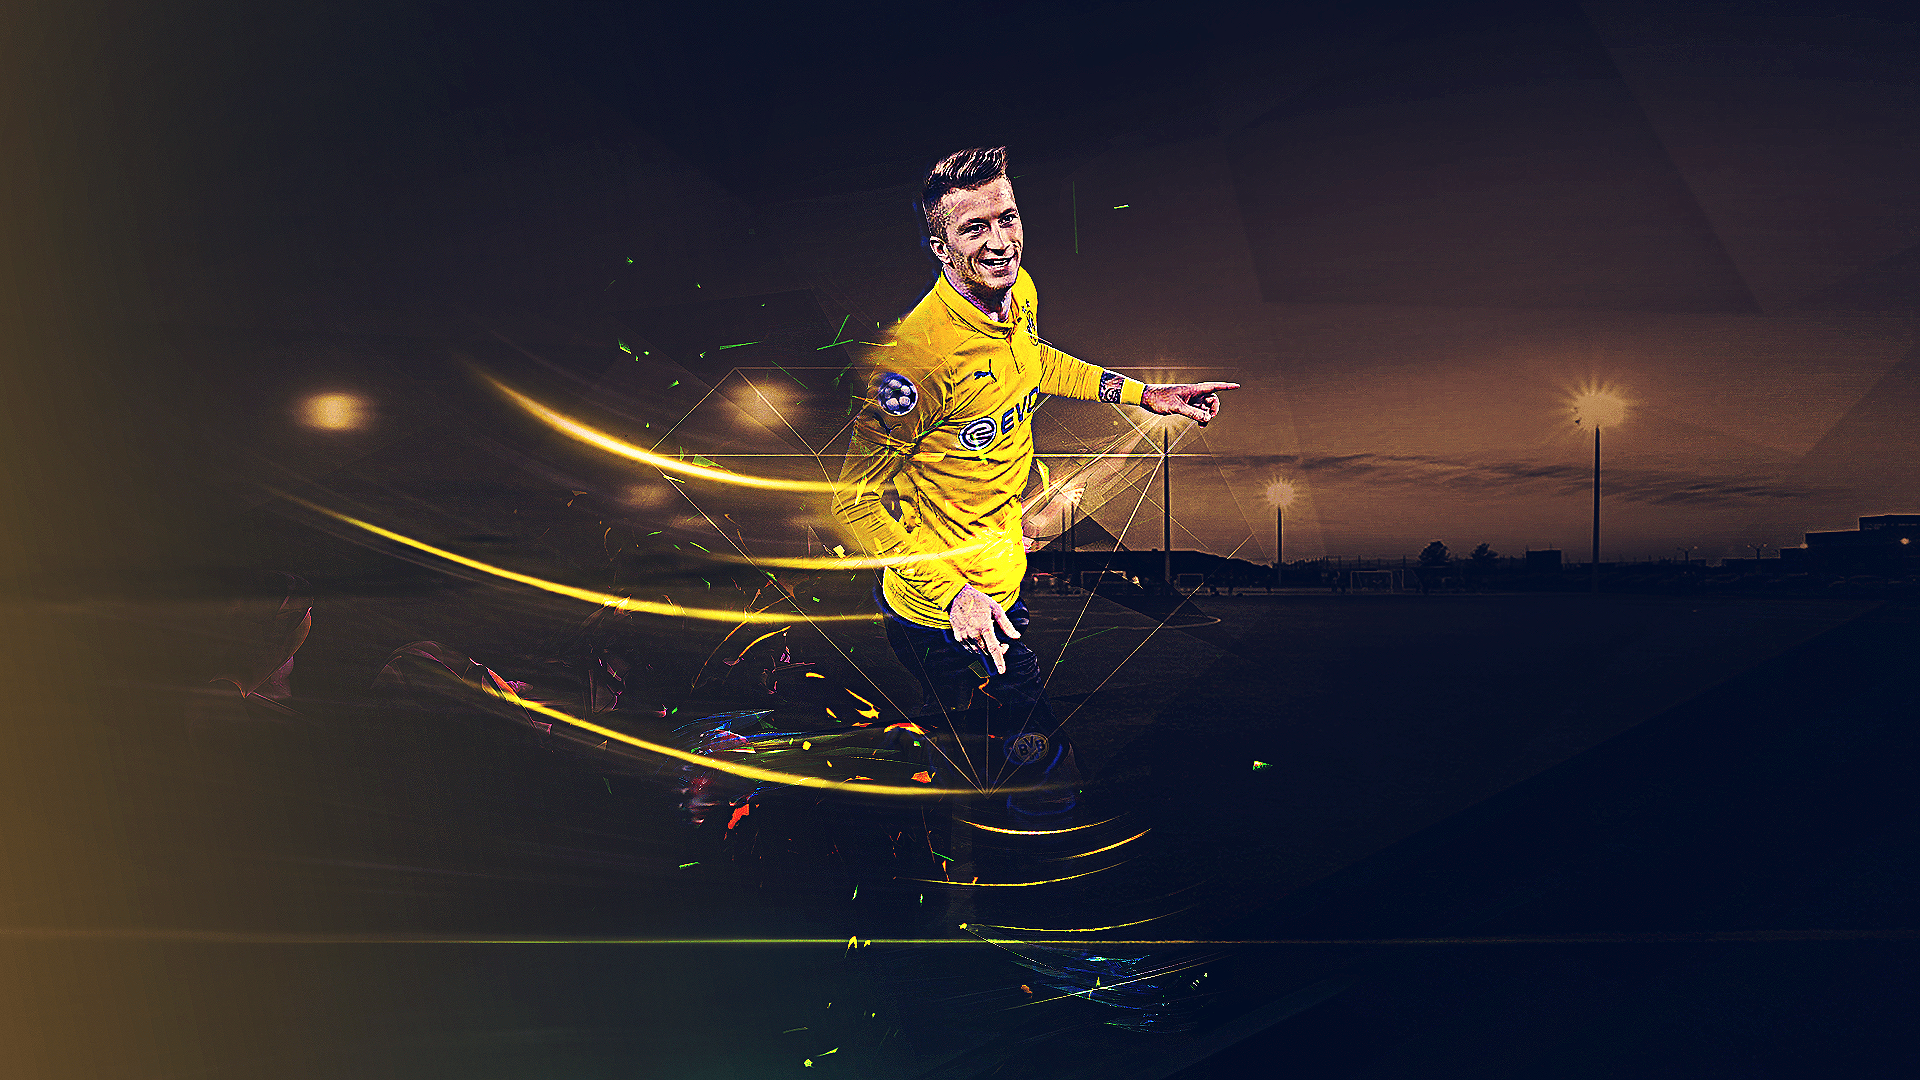 A soccer player in a yellow jersey kicking a ball - Soccer